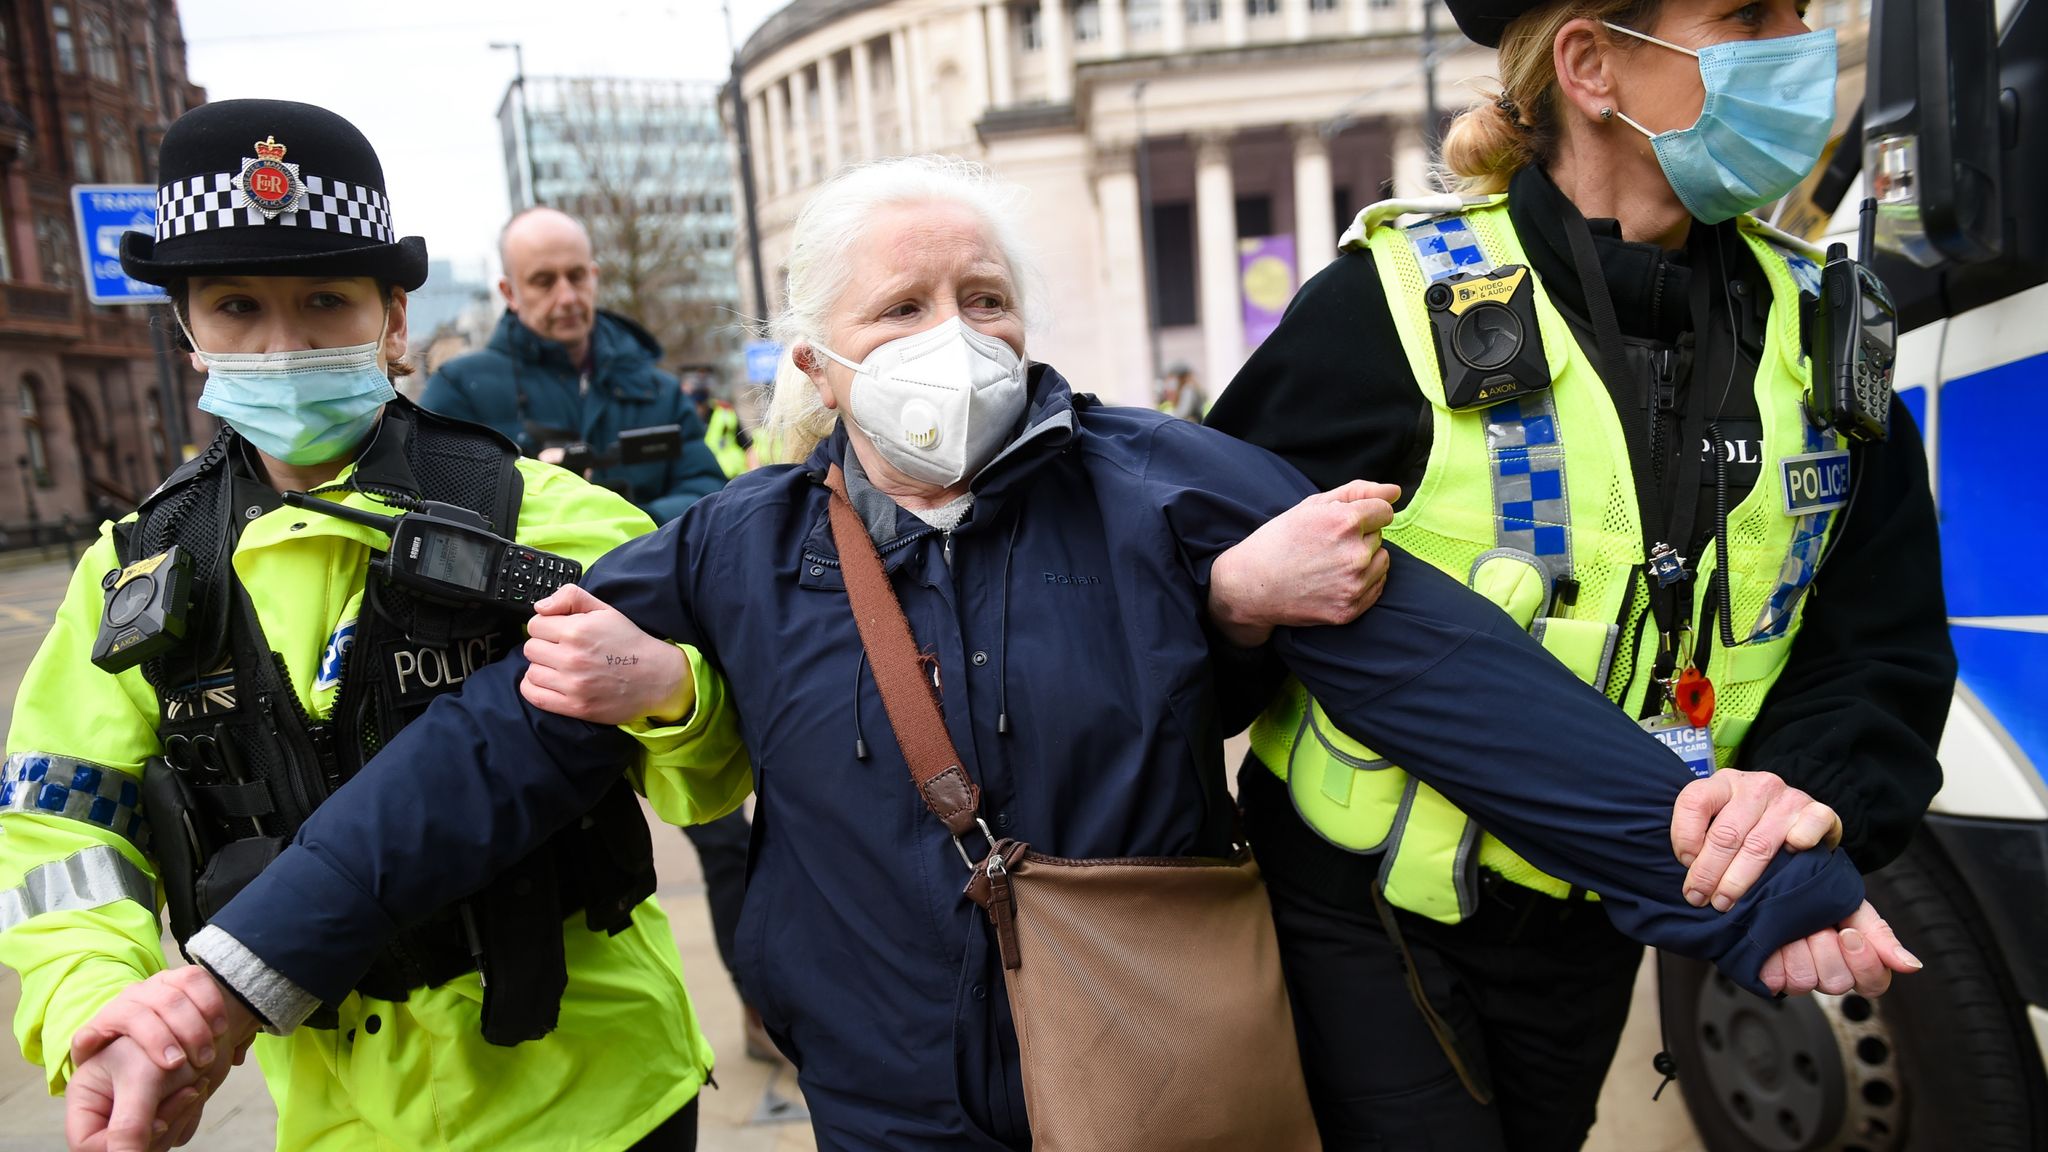 Organiser of Manchester protest over 1% NHS pay rise fined £10,000, The Manc